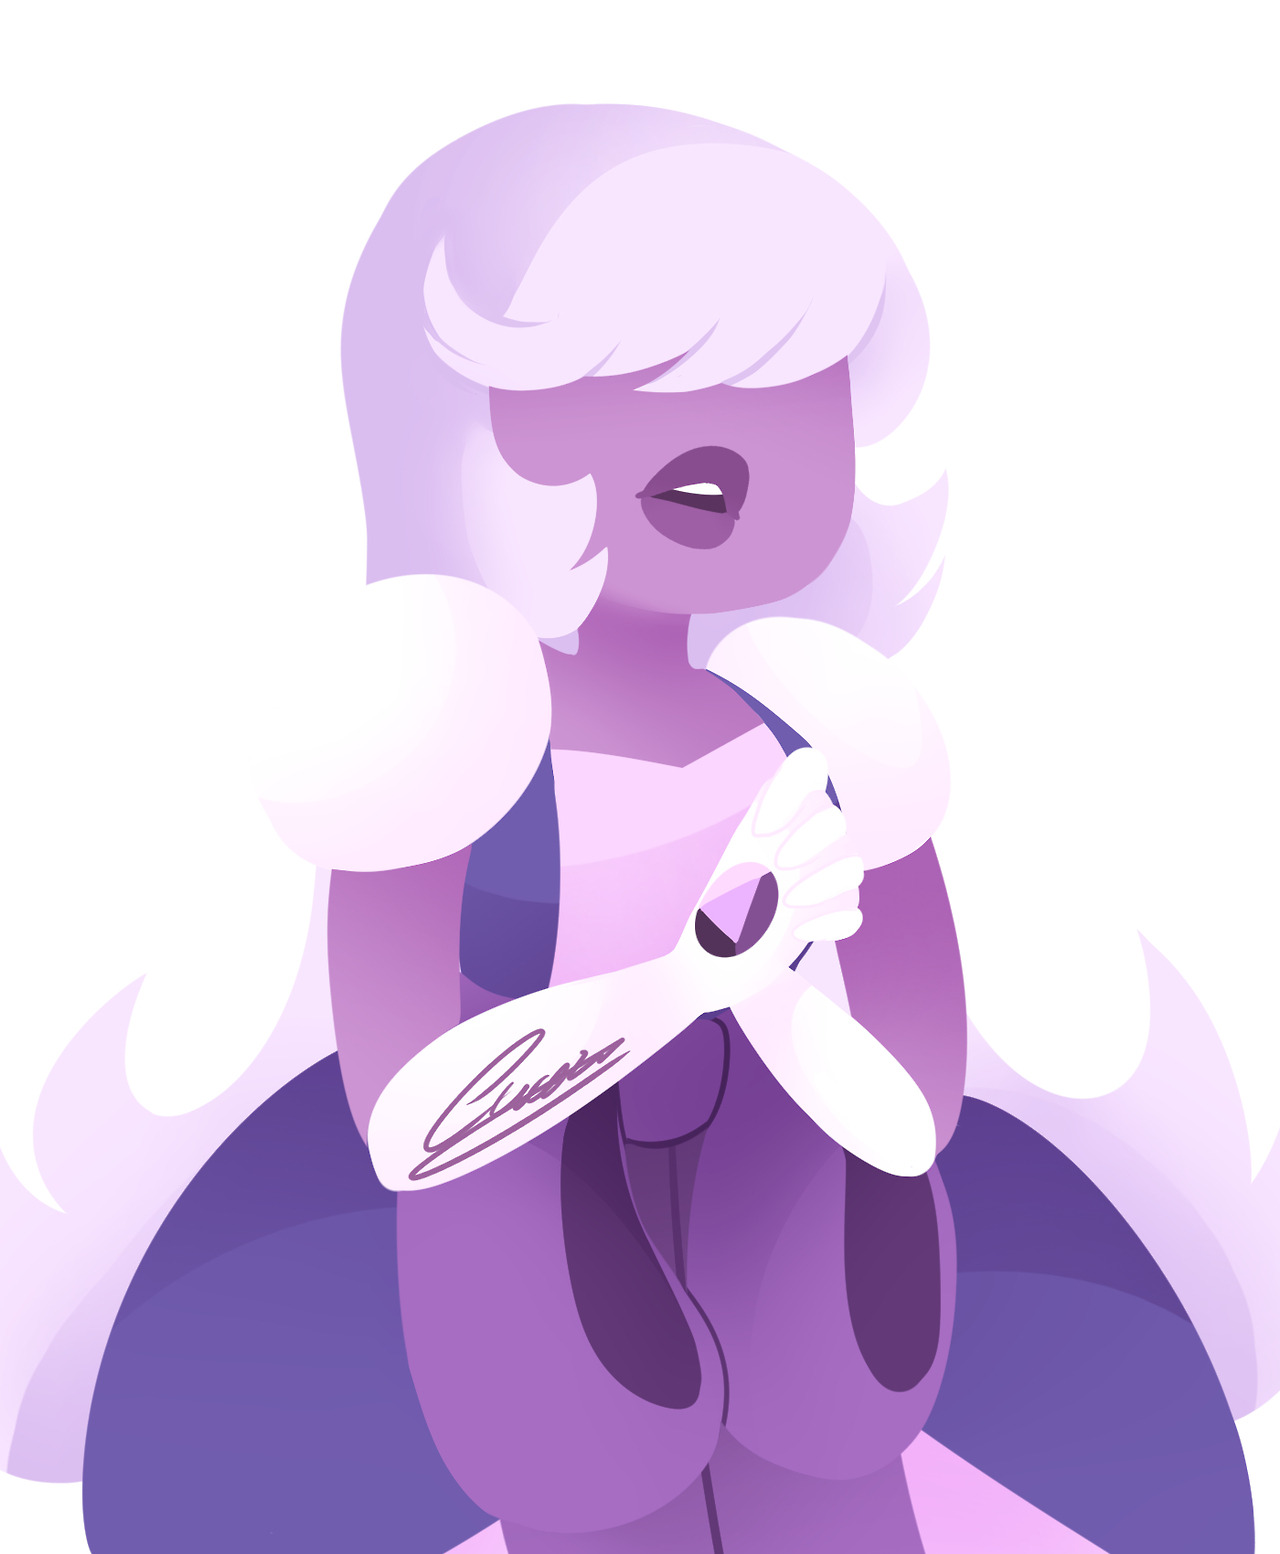 tried out a fusion between sapphire and pad sapphire as long with lineless art